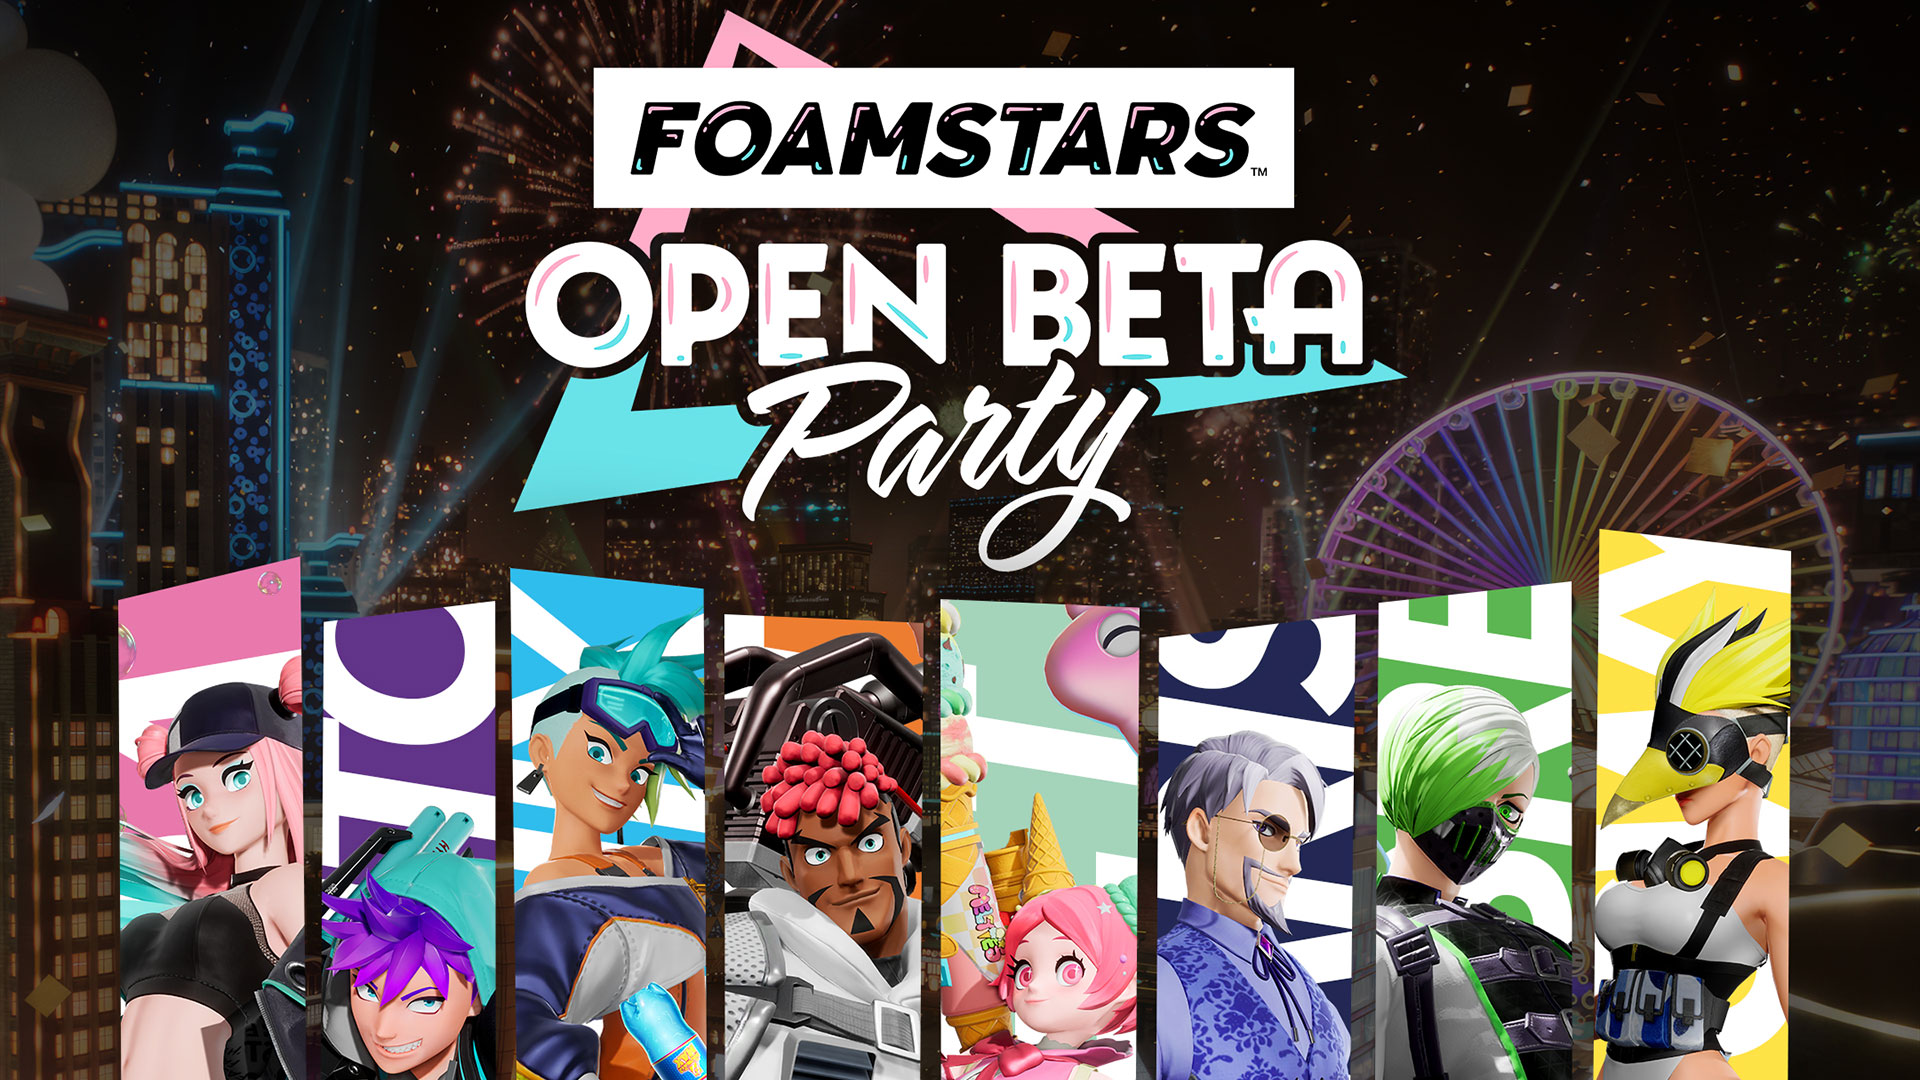 Foamstars is getting an open beta event from September 29 to October 1